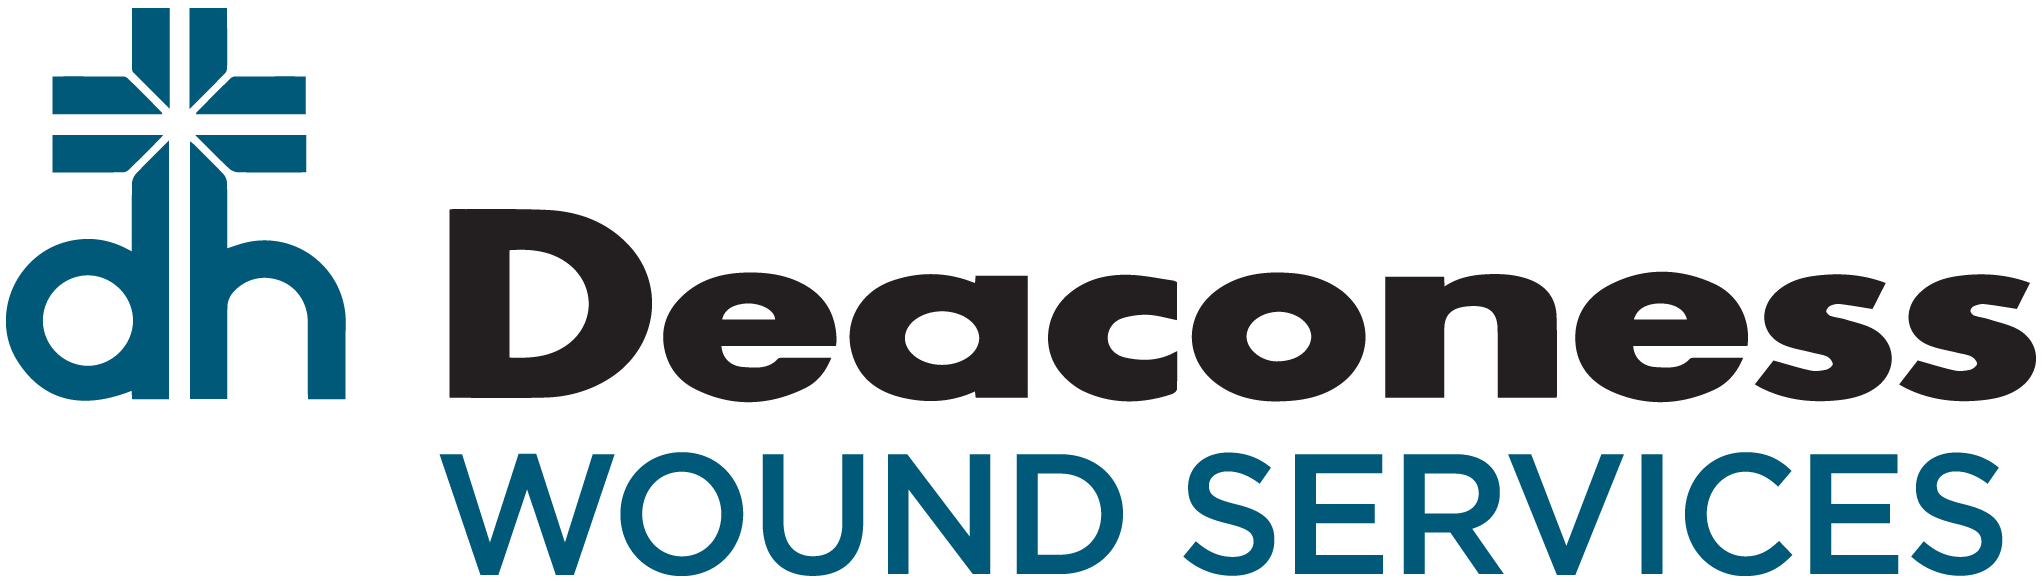 Deaconess Wound Services